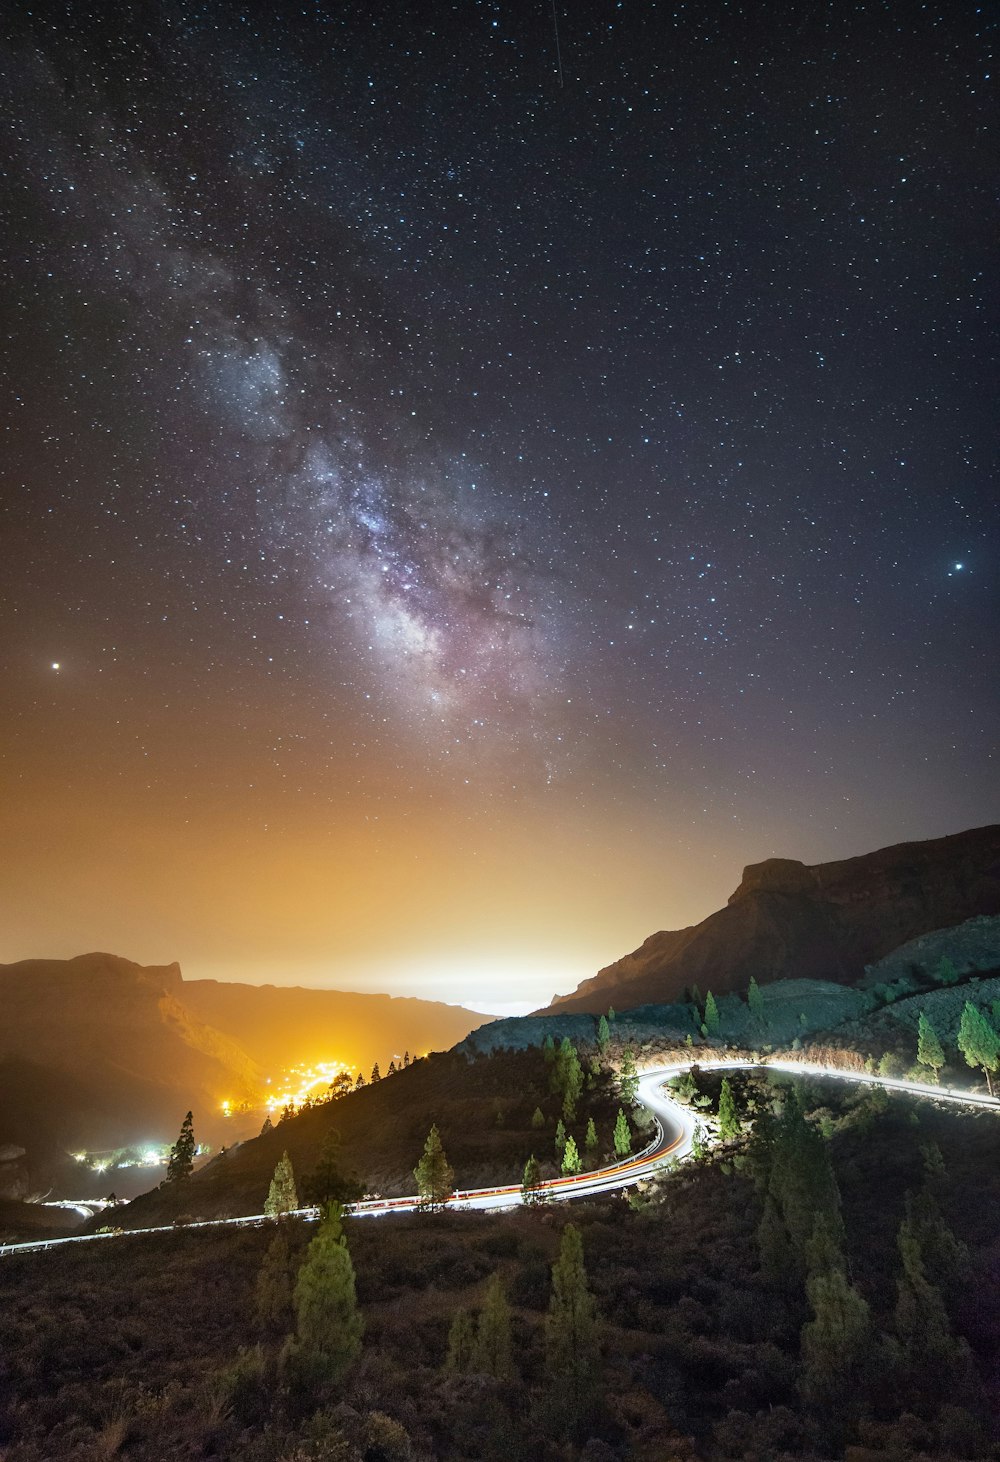 scenery of stars and mountain hill